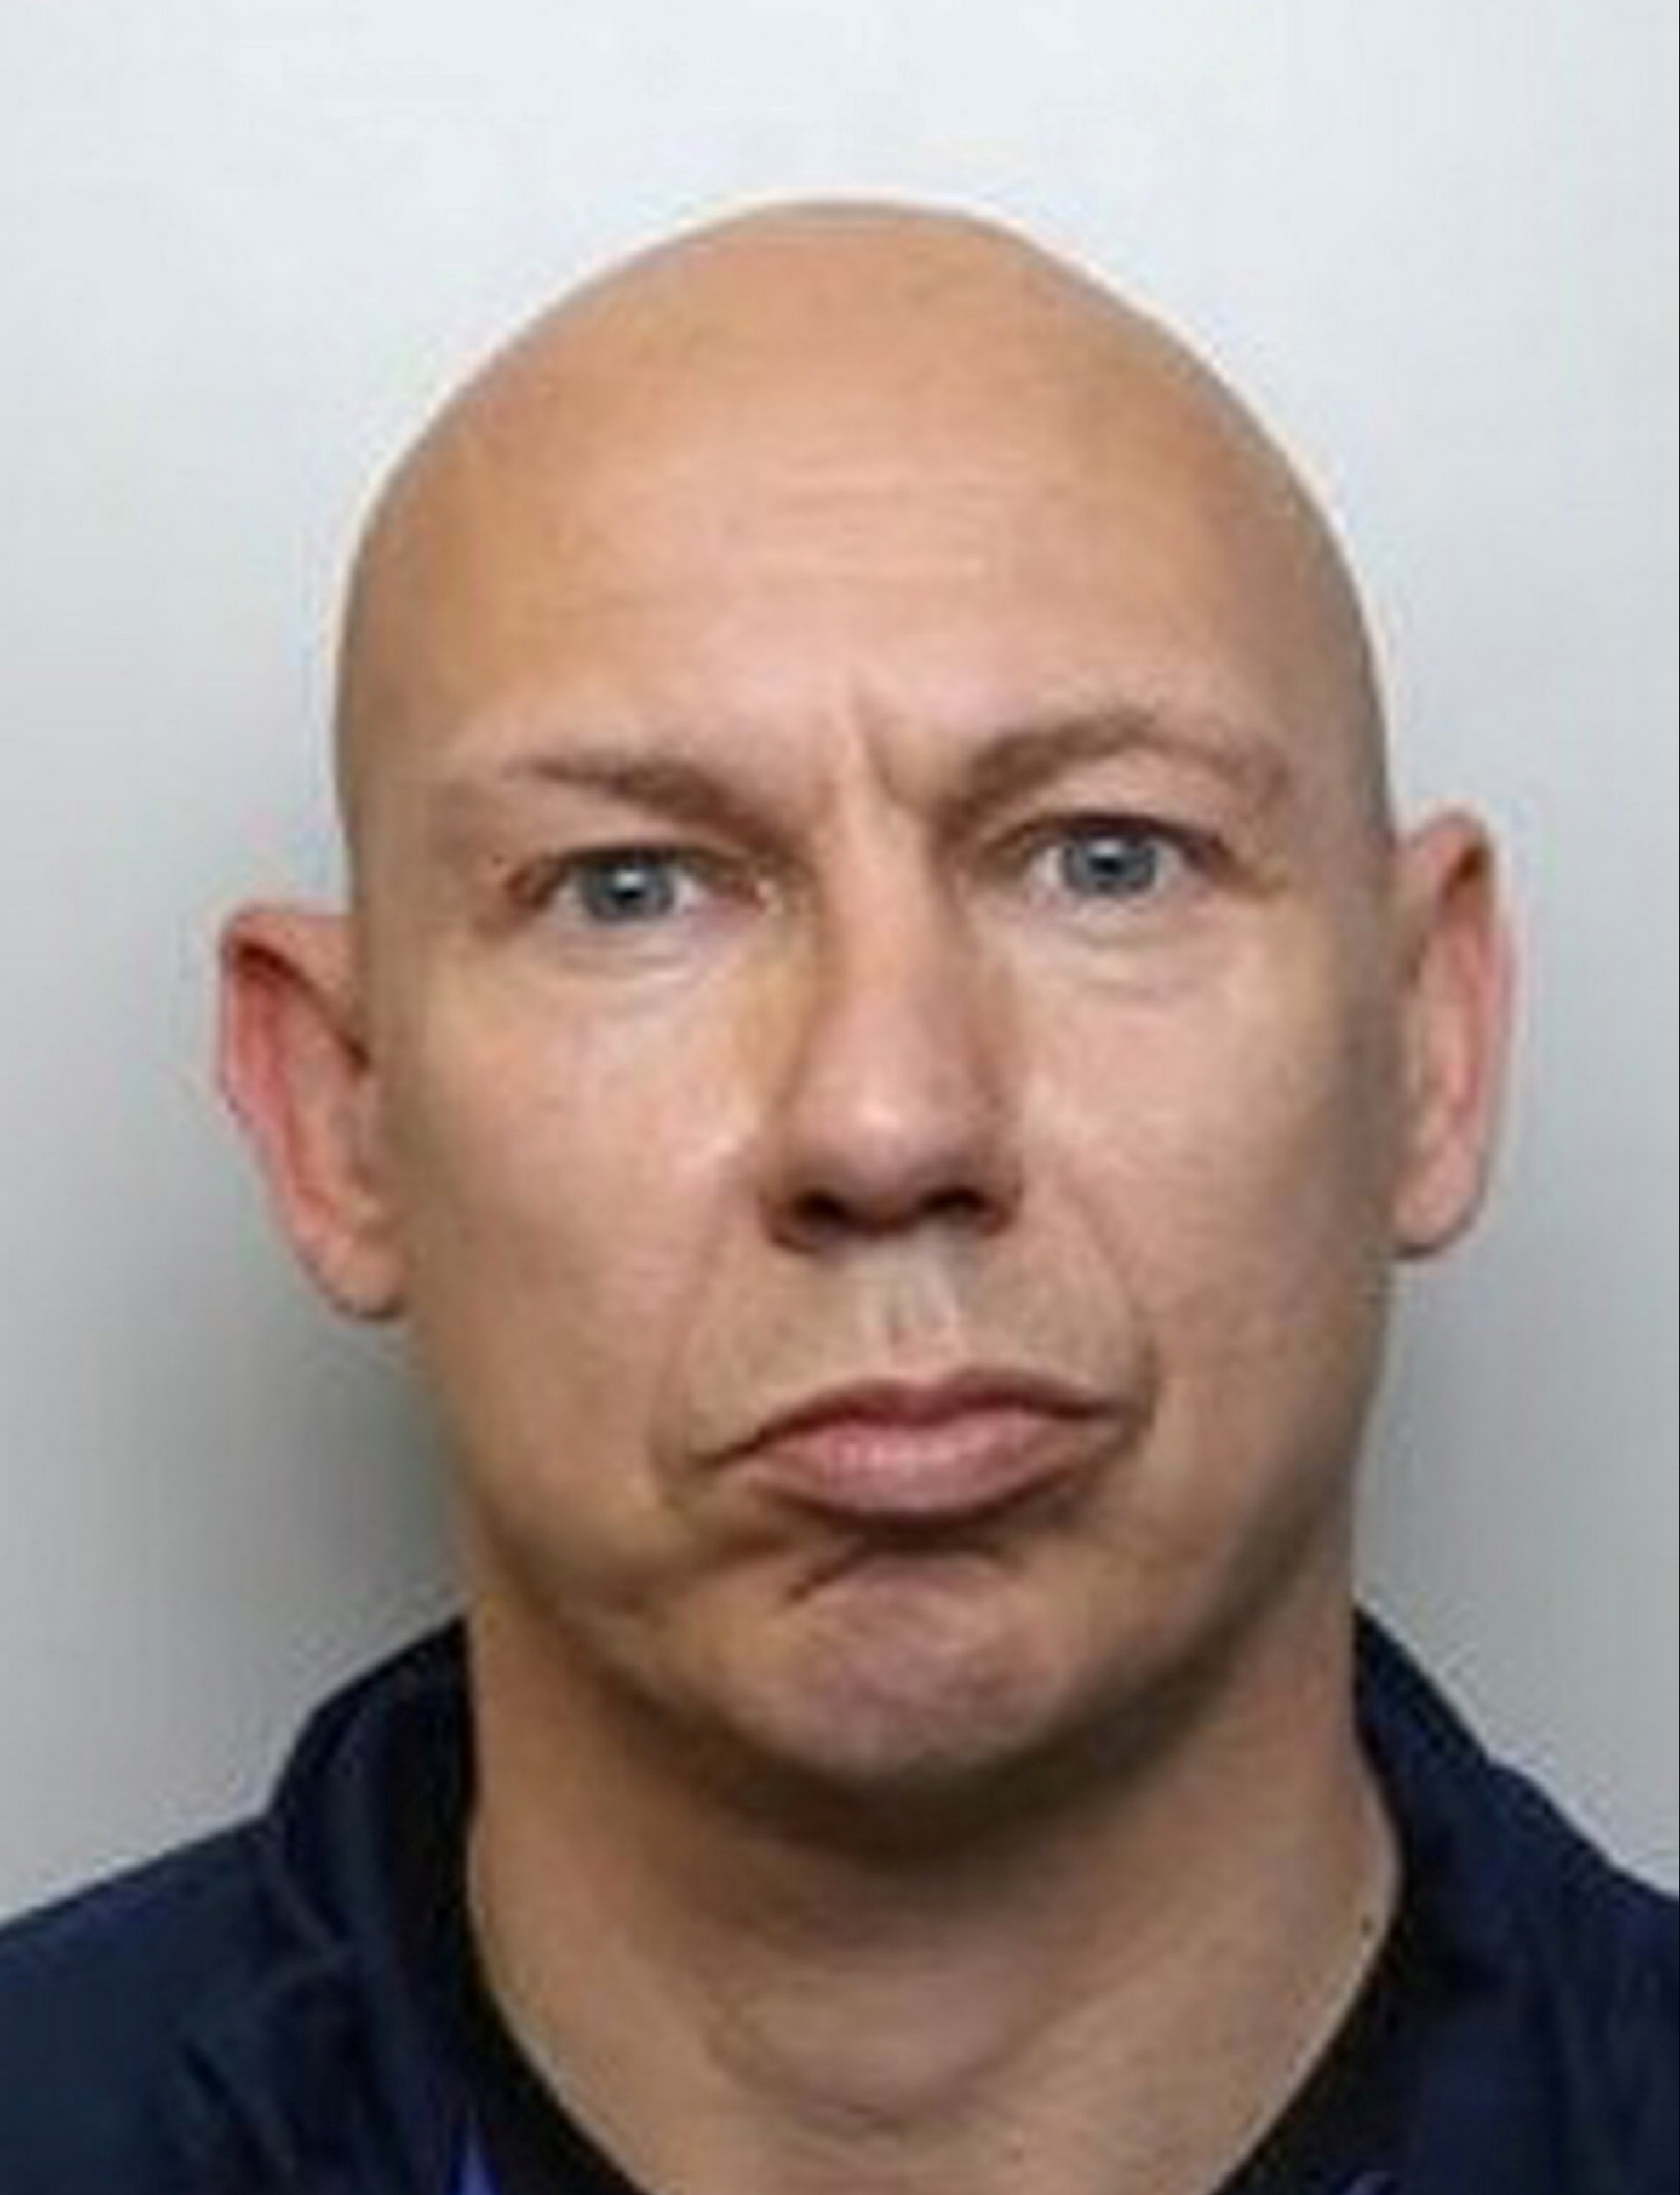 Ex-Leeds United player Paul Shepherd was jailed for nine years after he was uncovered as a courier for a major crime gang